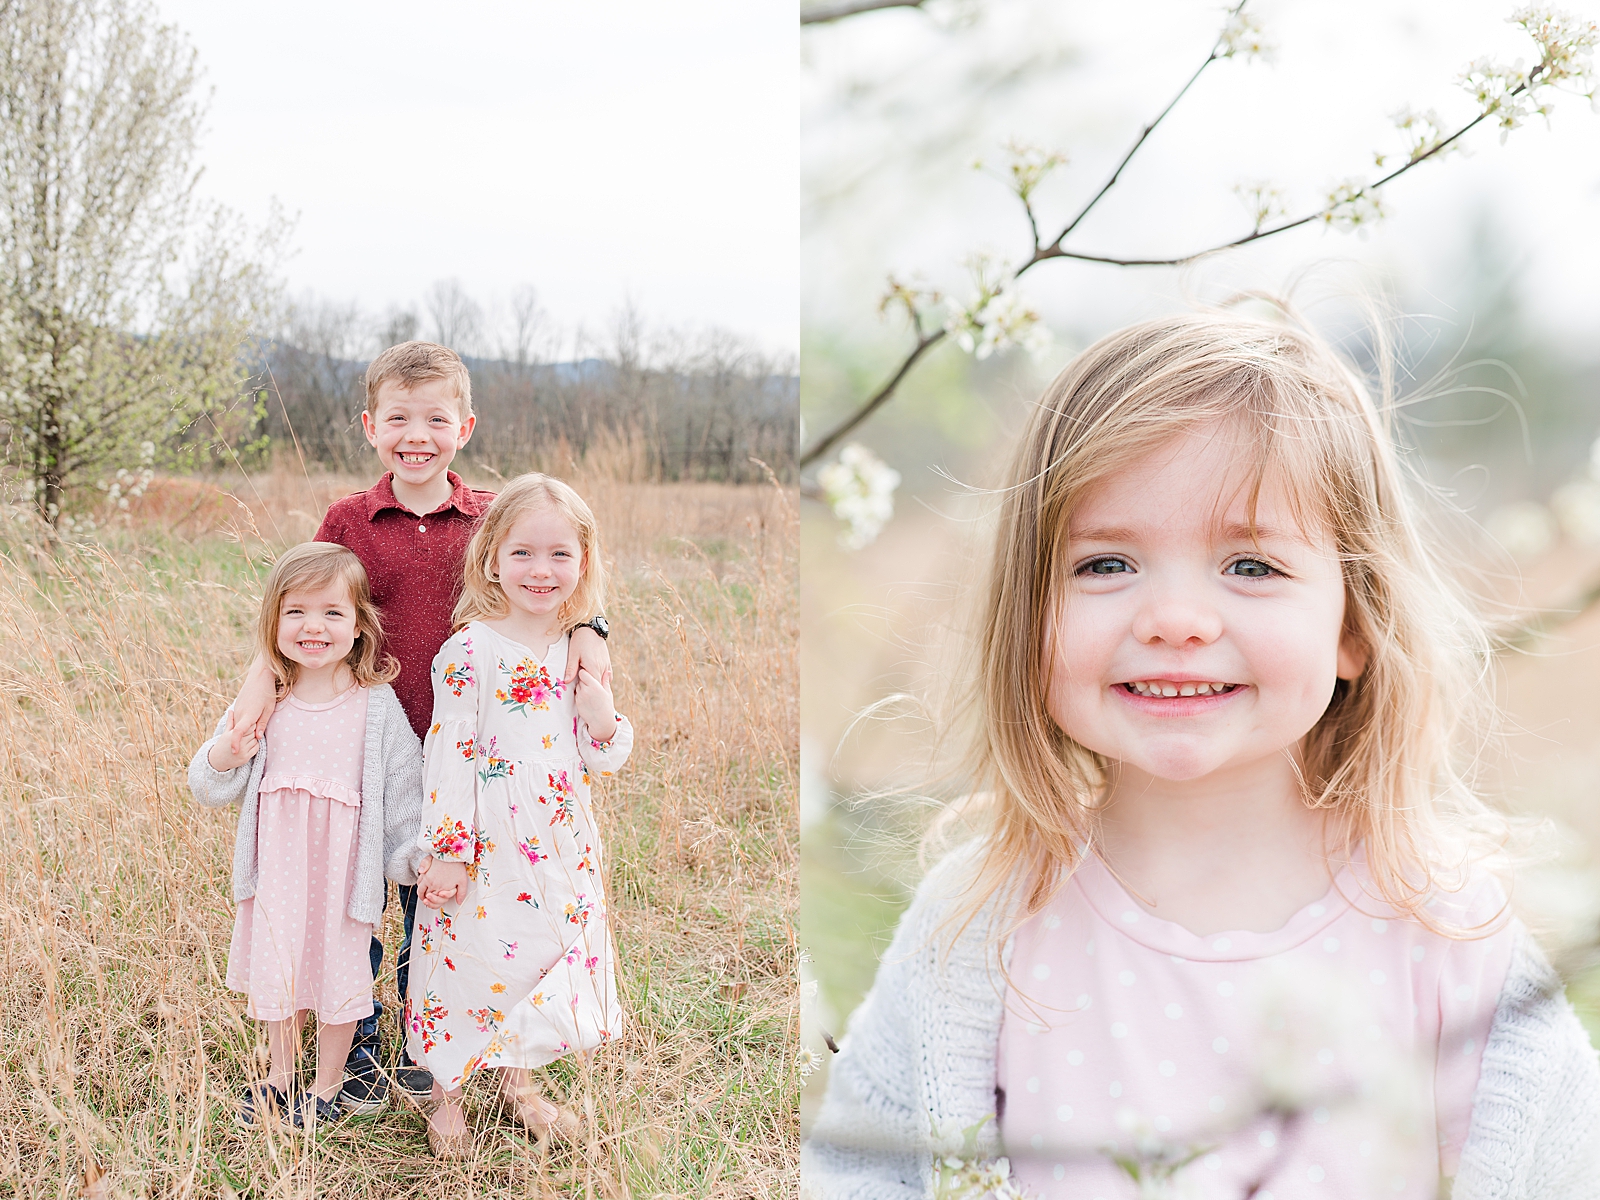 Asheville Photographer's Family brother with two sisters and little girl in tree smiling Photos